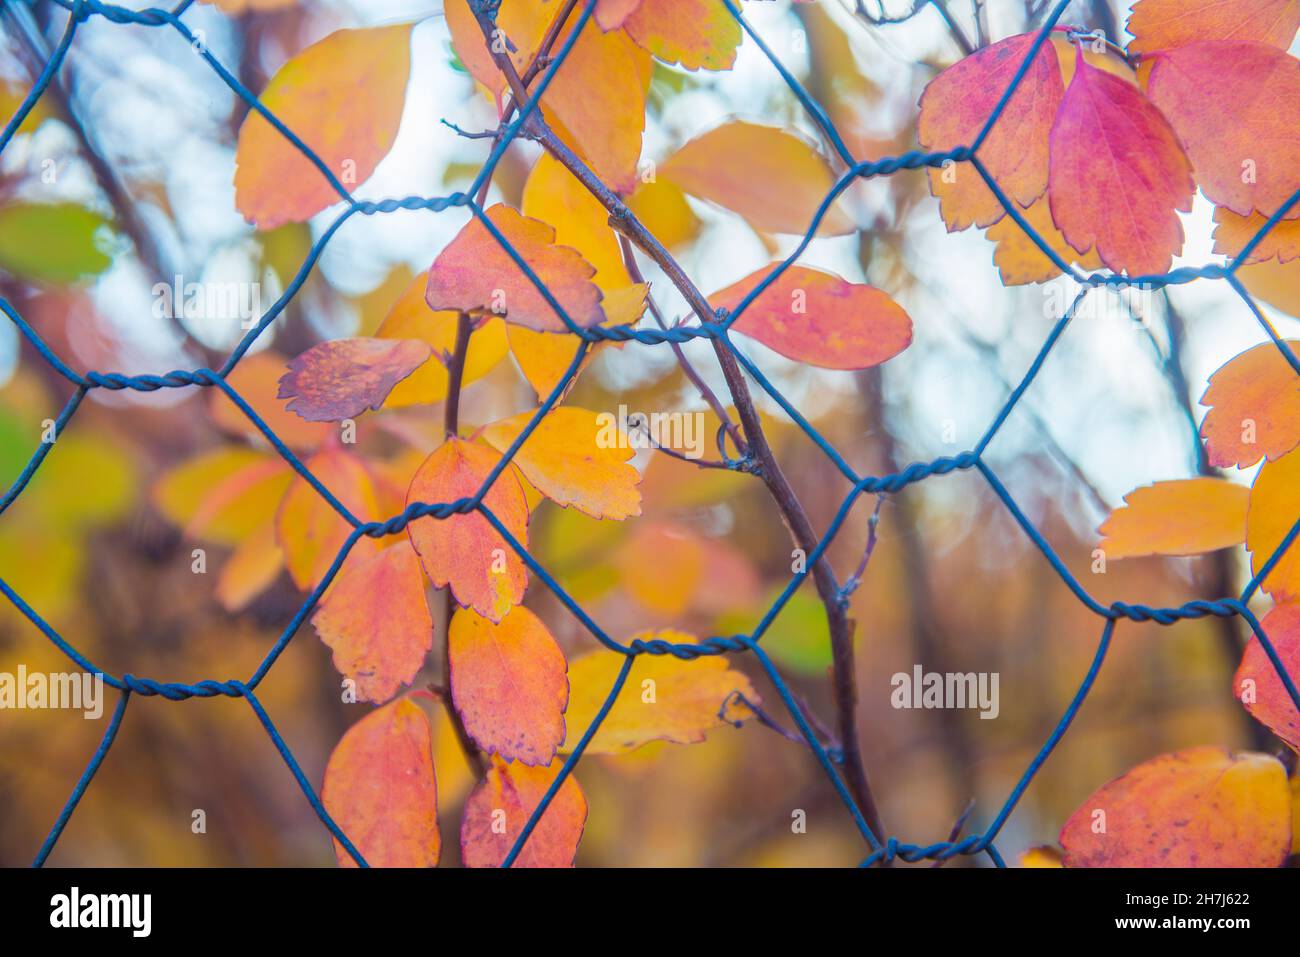 Autumn leaves behind a wire fence. Stock Photo